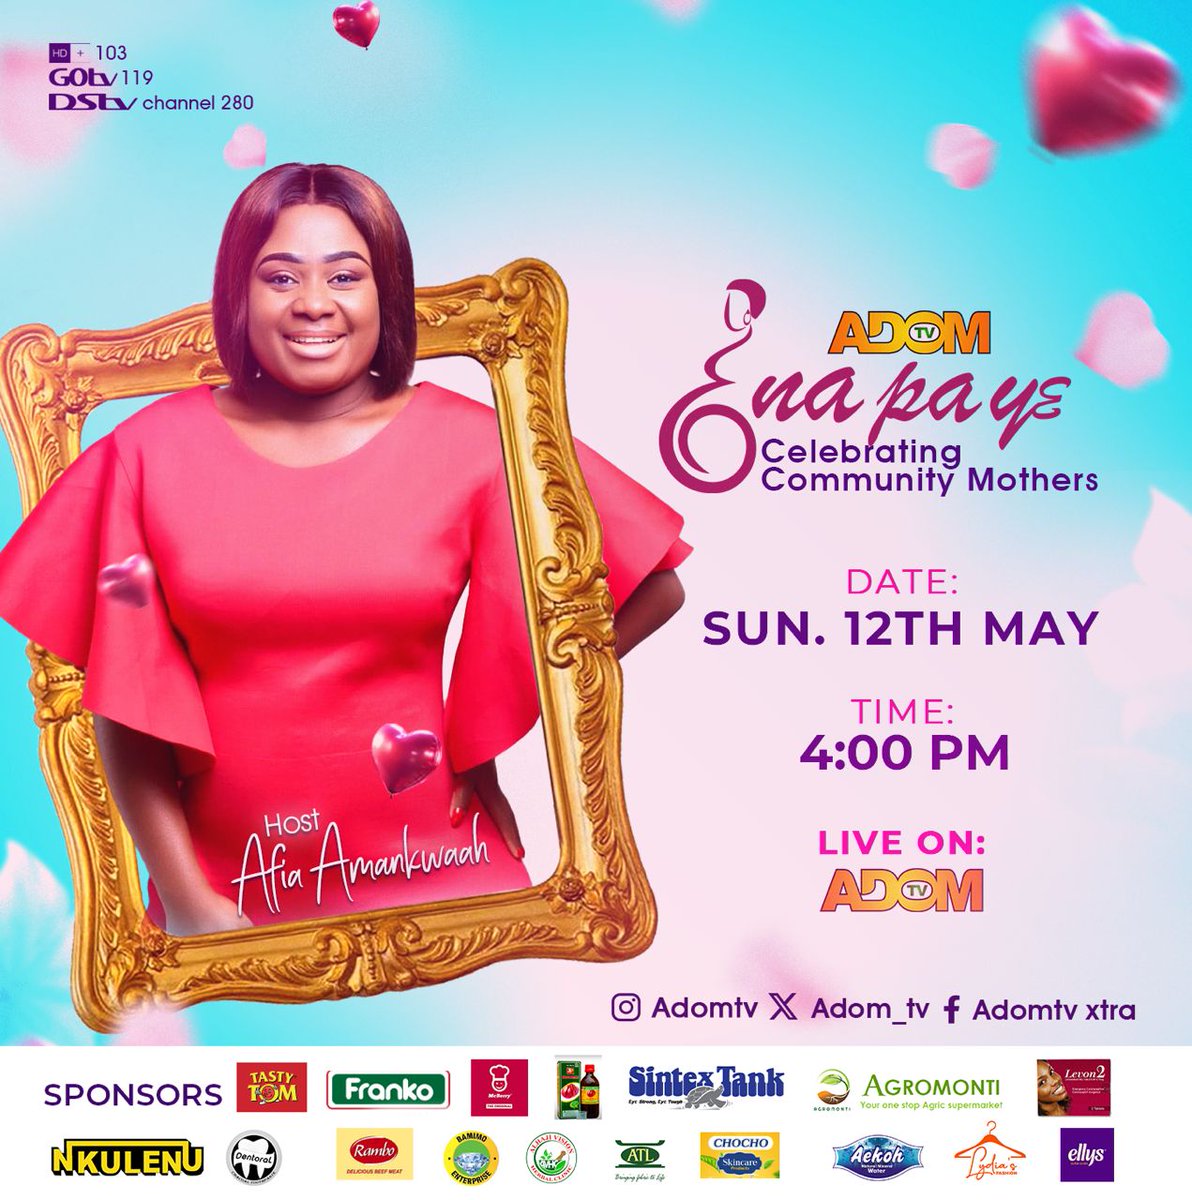 Join us this Sunday for an unforgettable event filled with love, laughter, and cherished memories. Treat Mom to a day she'll treasure forever. Adom TV Enapa Ye, Celebrating Community Mothers. #EnapaYe